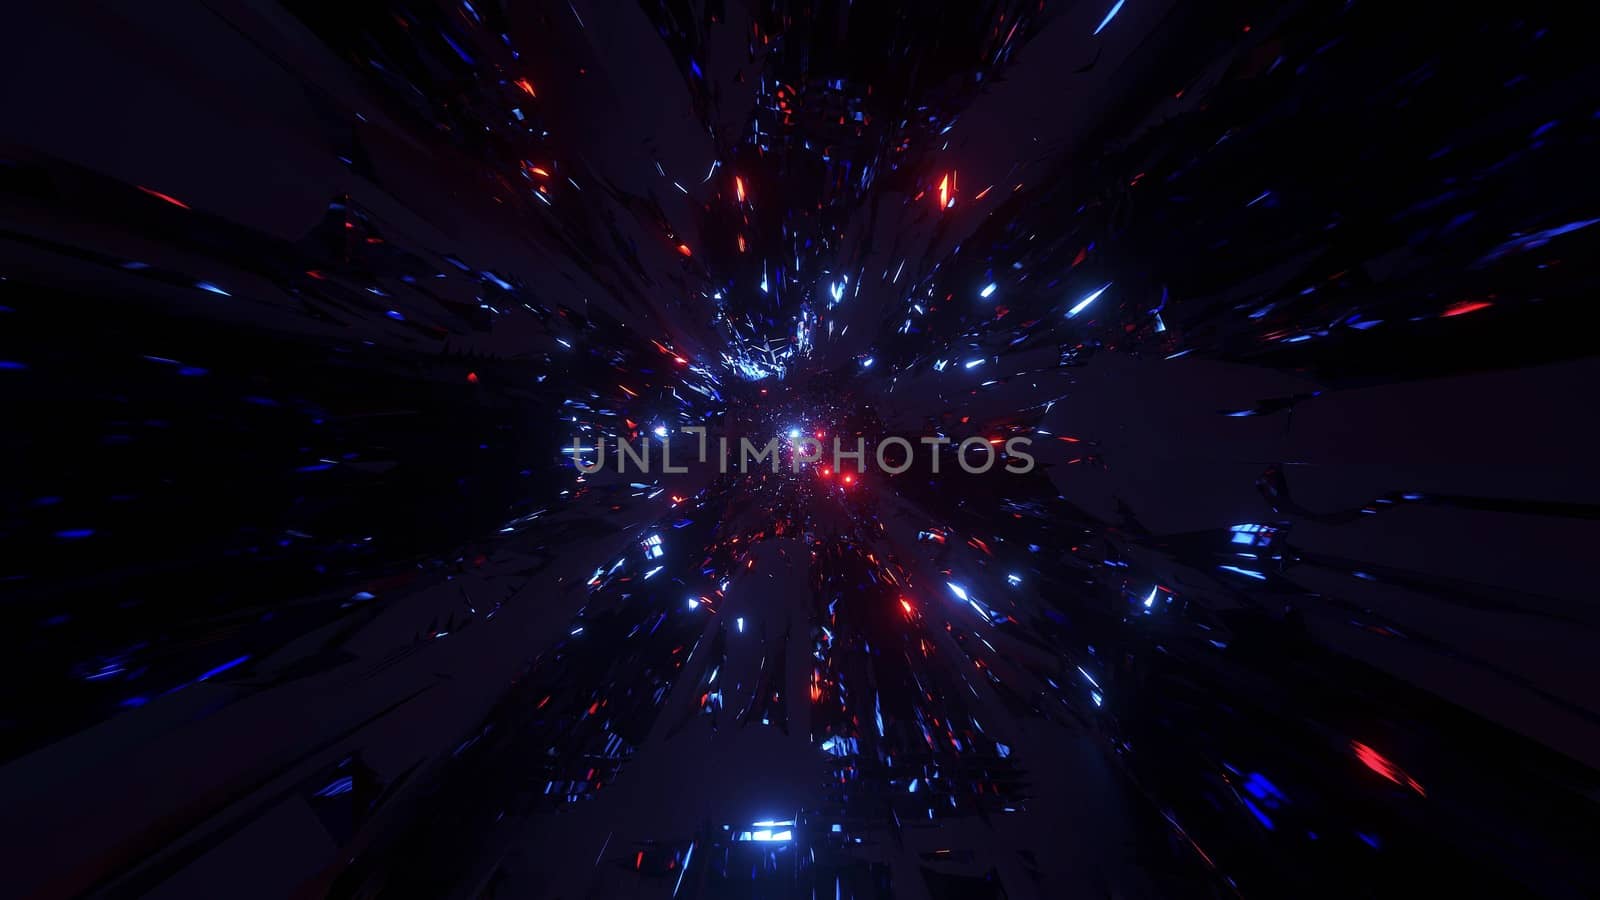 abstract space galaxy tunnel with glowing sphere planets 3d illustration design background wallpaper, cool glowing 3d rendering graphic artwork